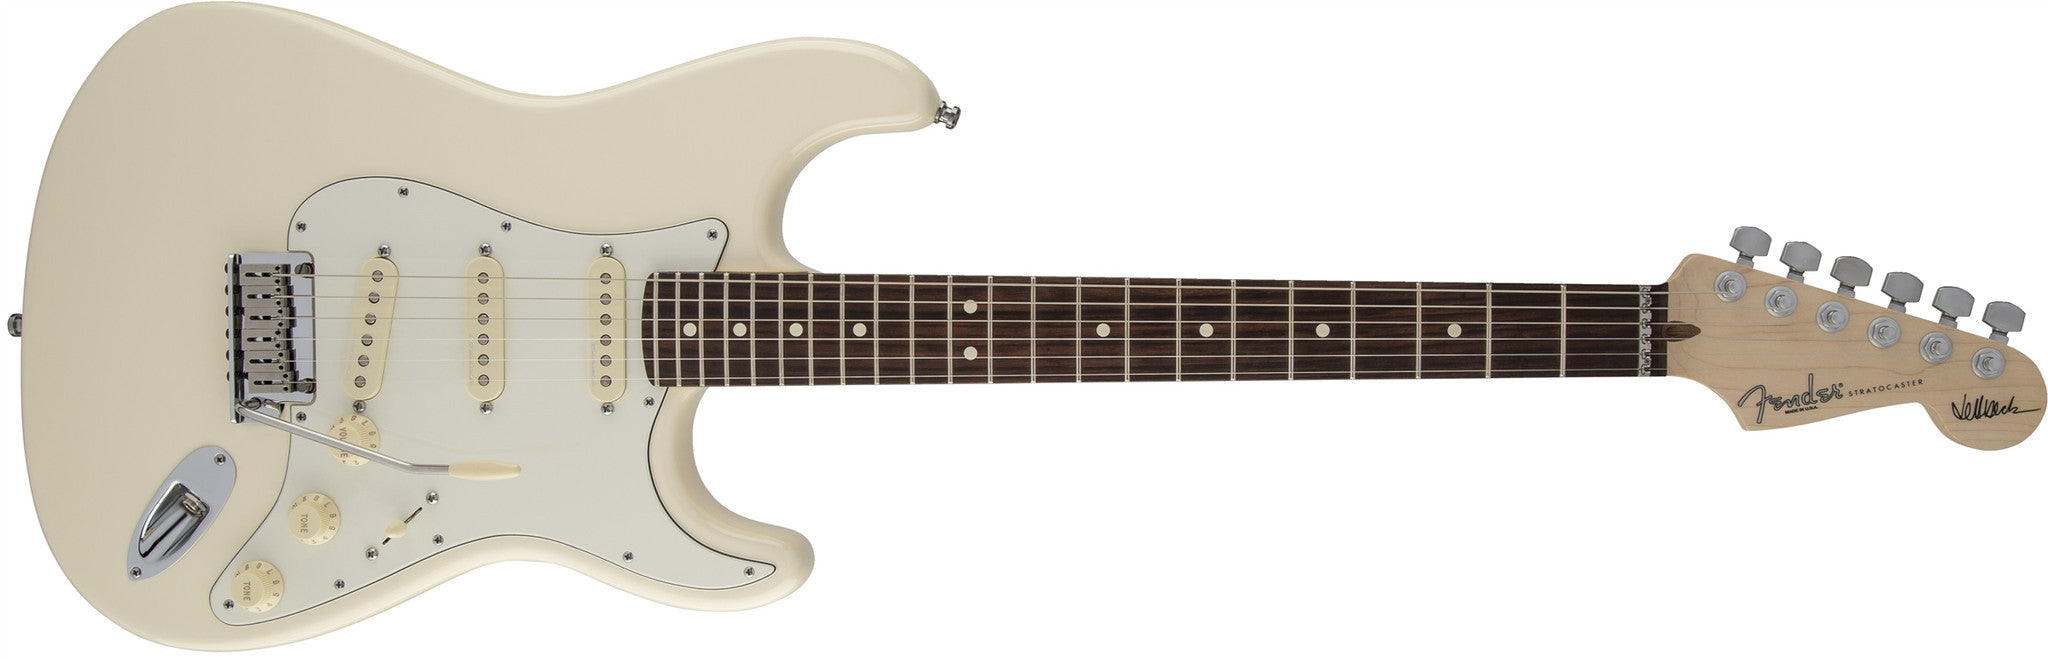 Fender Jeff Beck Stratocaster®, Rosewood Fingerboard, Olympic White 0119600805 - L.A. Music - Canada's Favourite Music Store!